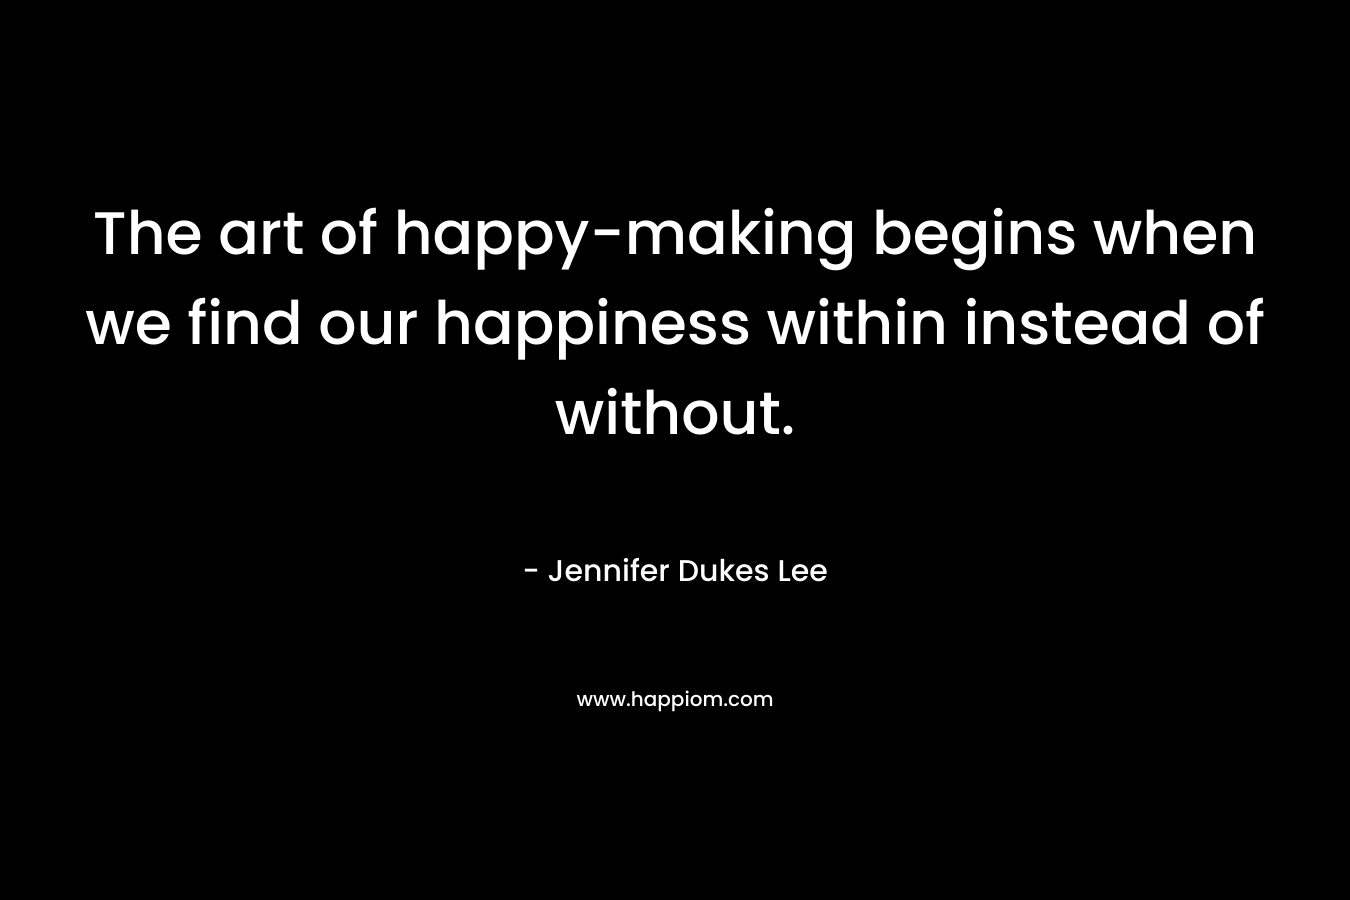 The art of happy-making begins when we find our happiness within instead of without.